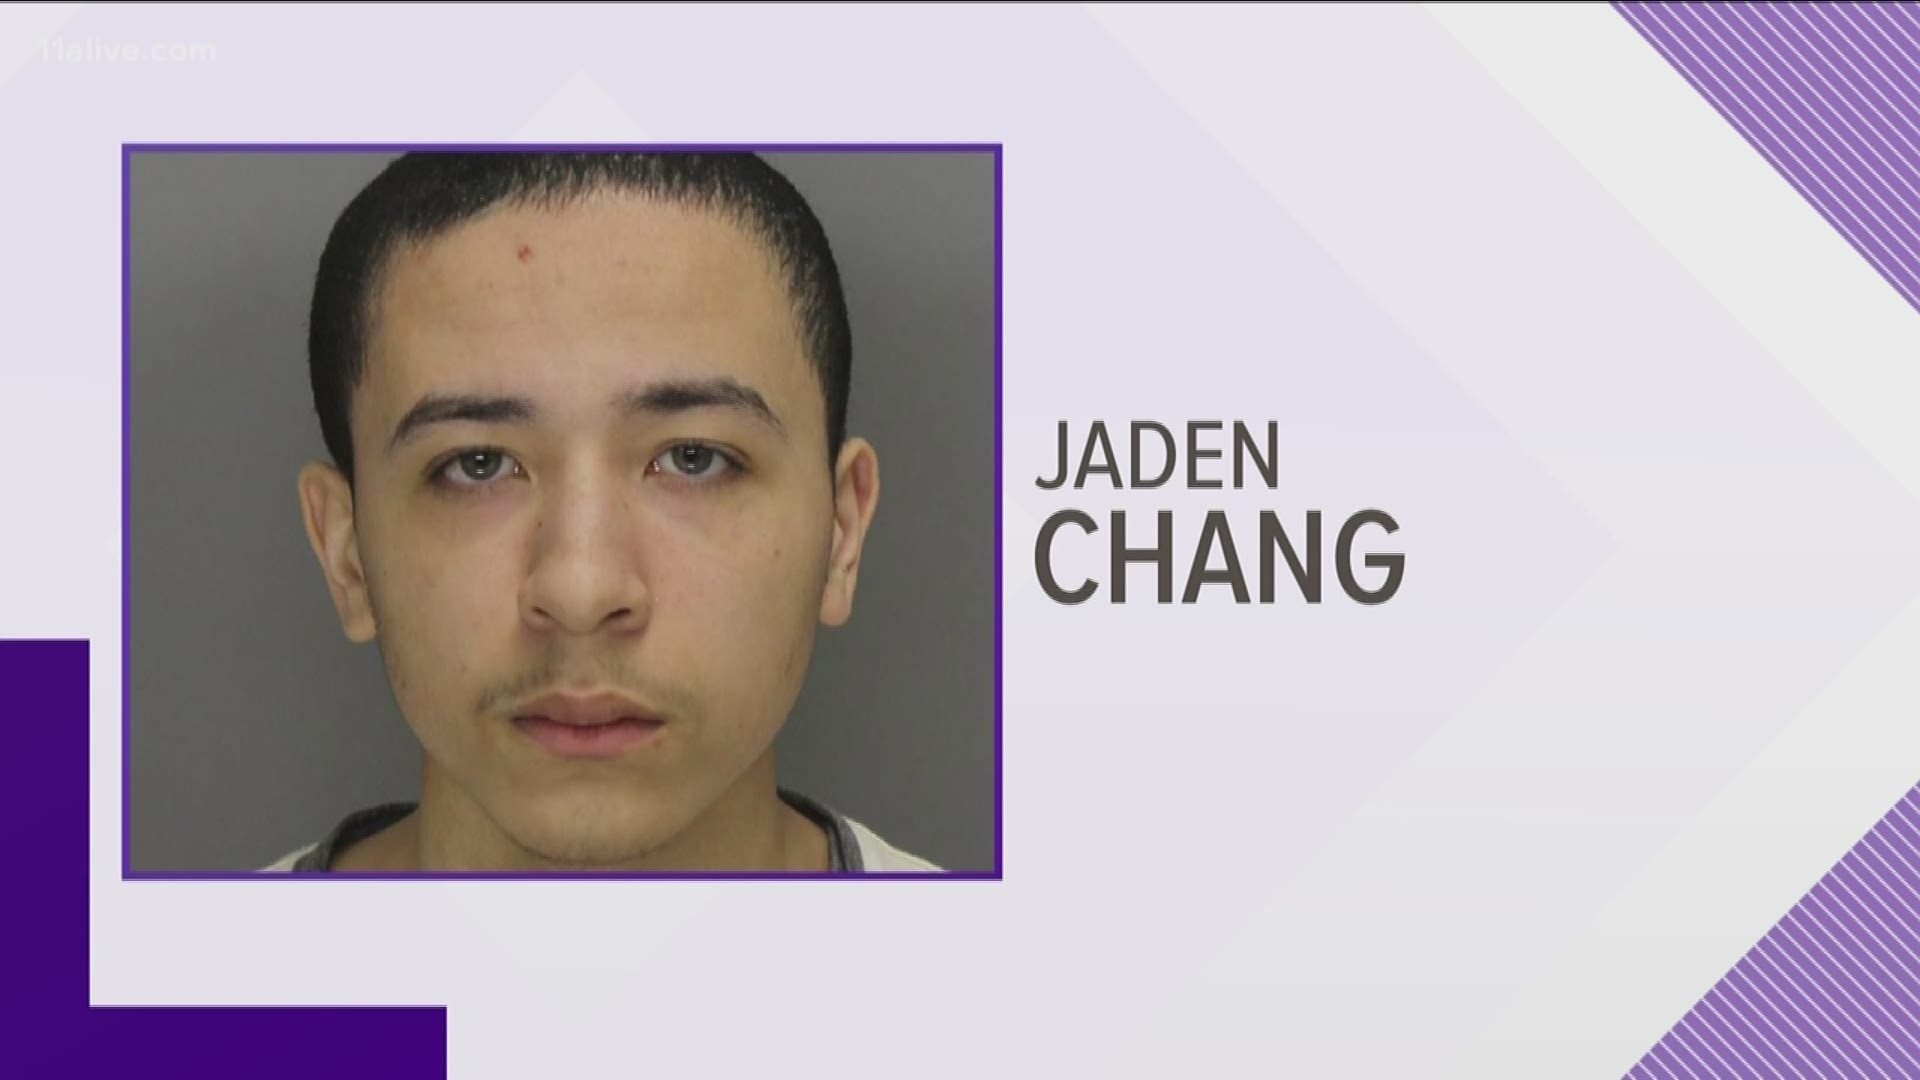 Jaden Chang, a student at South Cobb High School, was arrested and charged with simple battery harm following the incident that occurred in a classroom on Aug. 5.